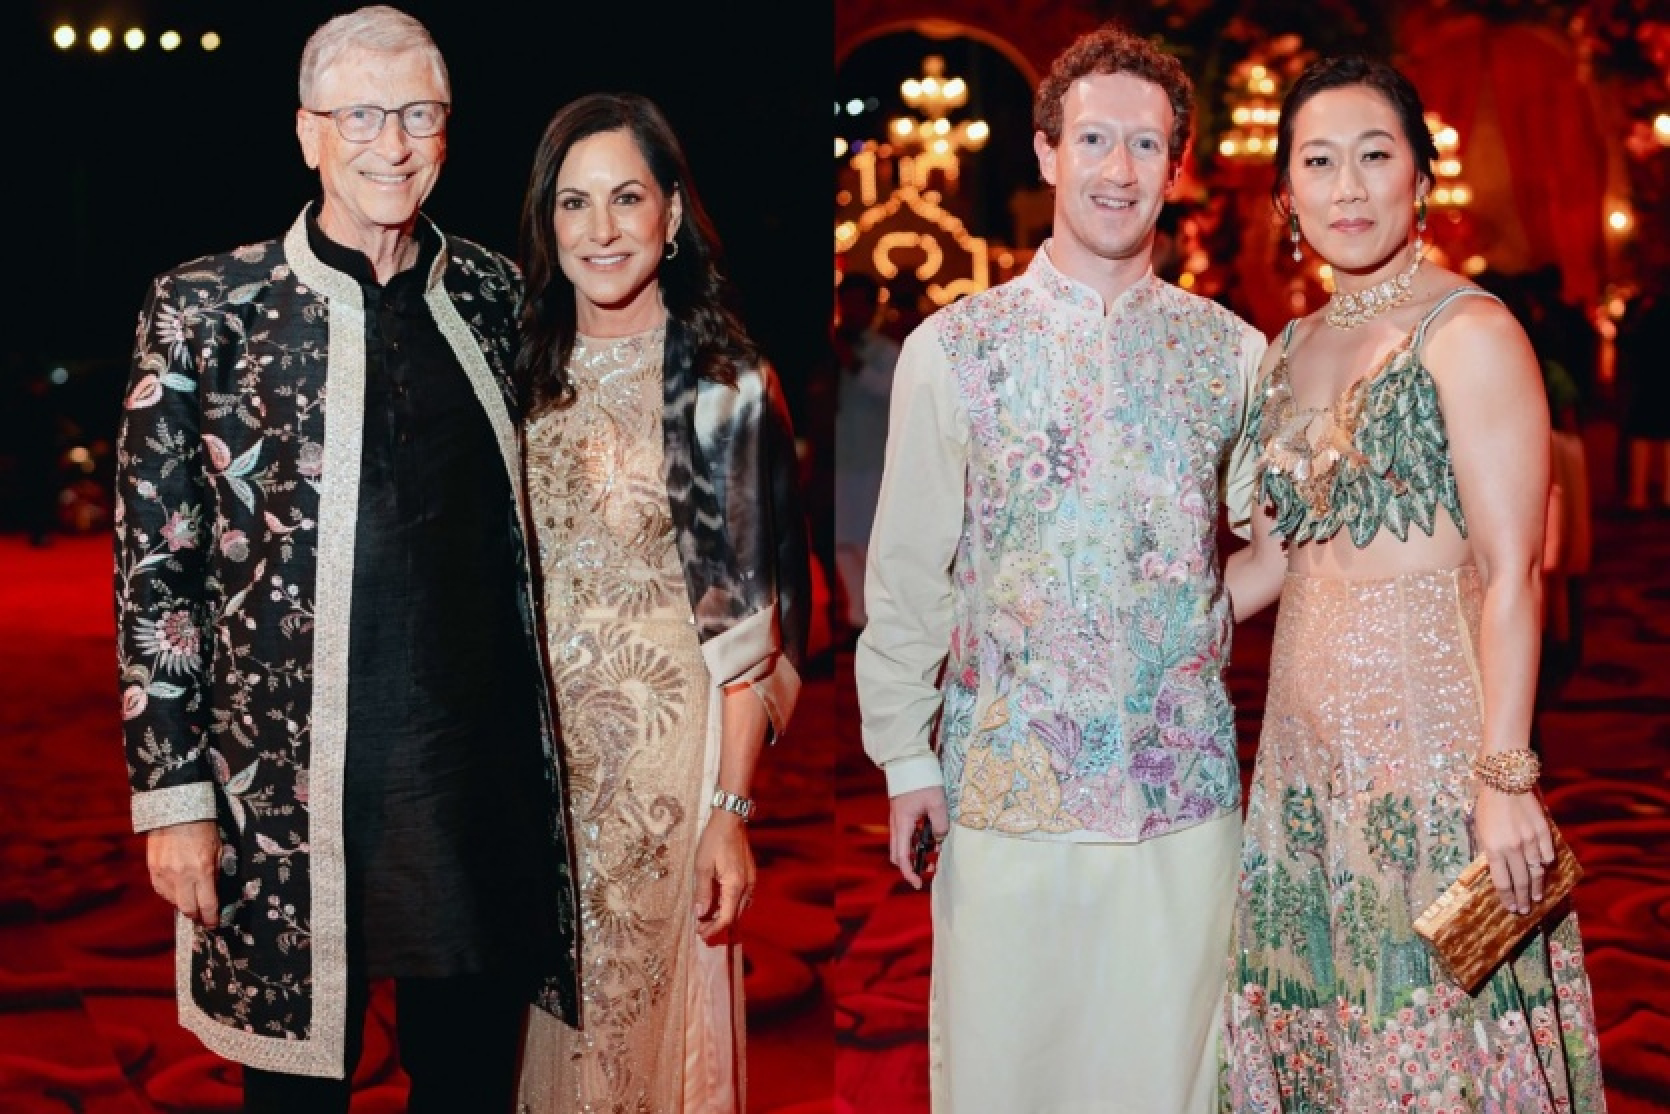 Bill Gates, Zuckerberg and Rihanna "glammed up" at the pre-wedding party of Asia's richest man's son